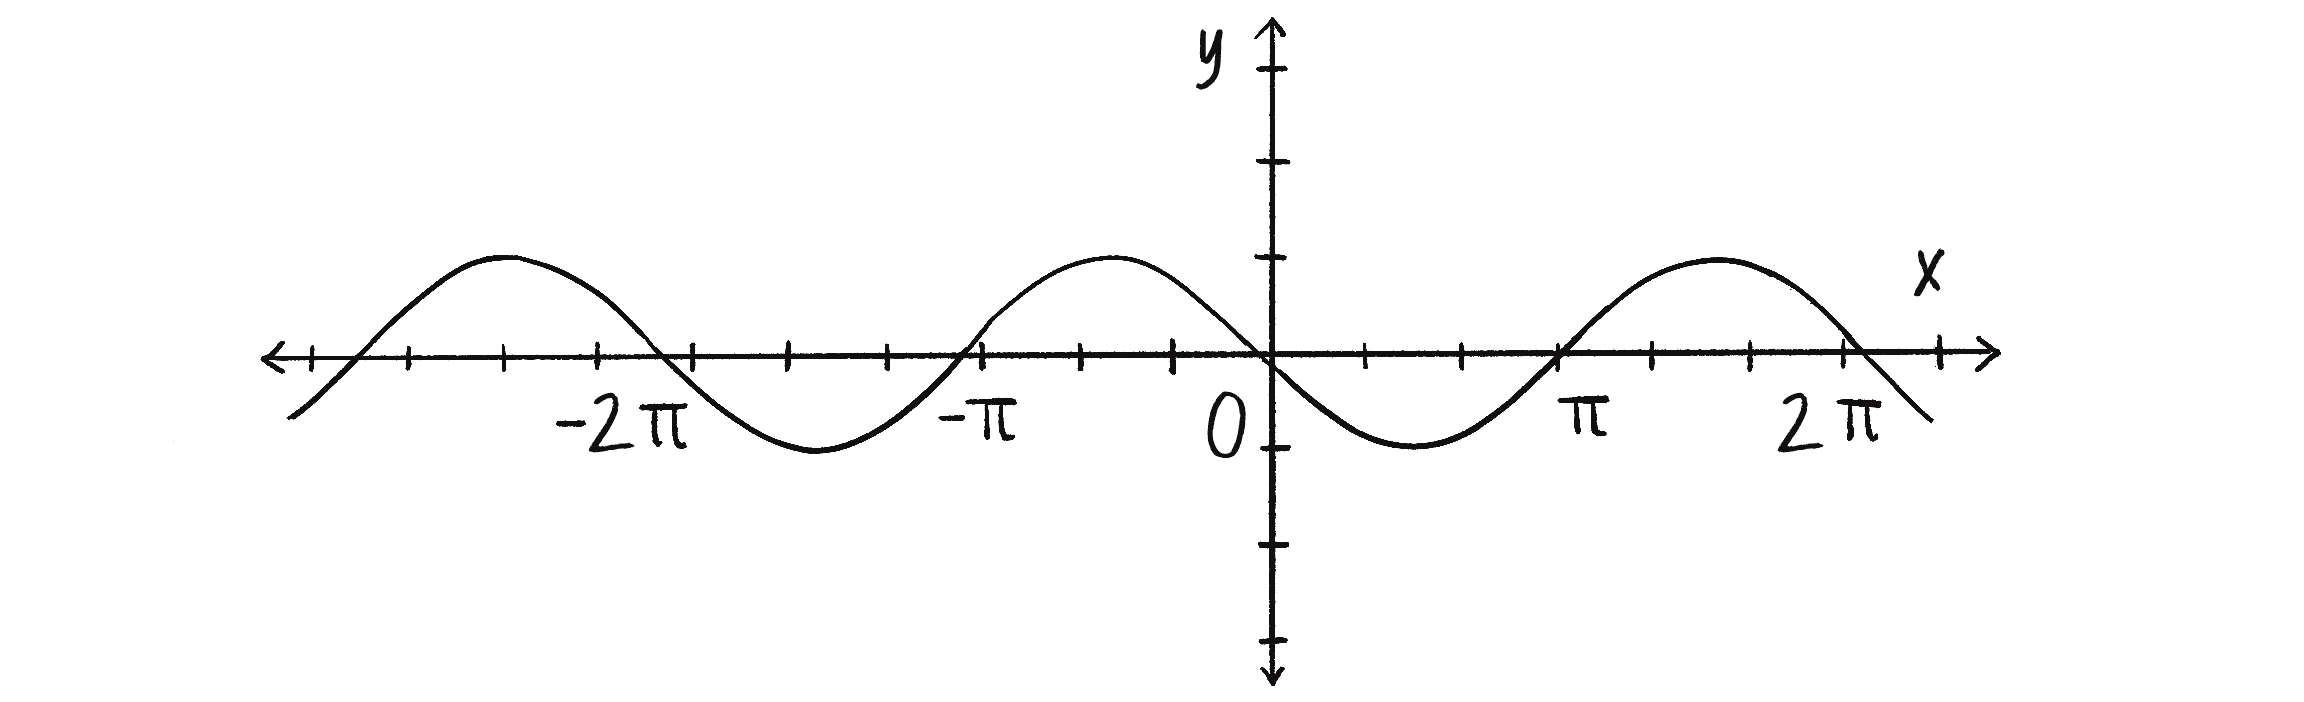 Figure 3.9: A graph of y = sin(x)